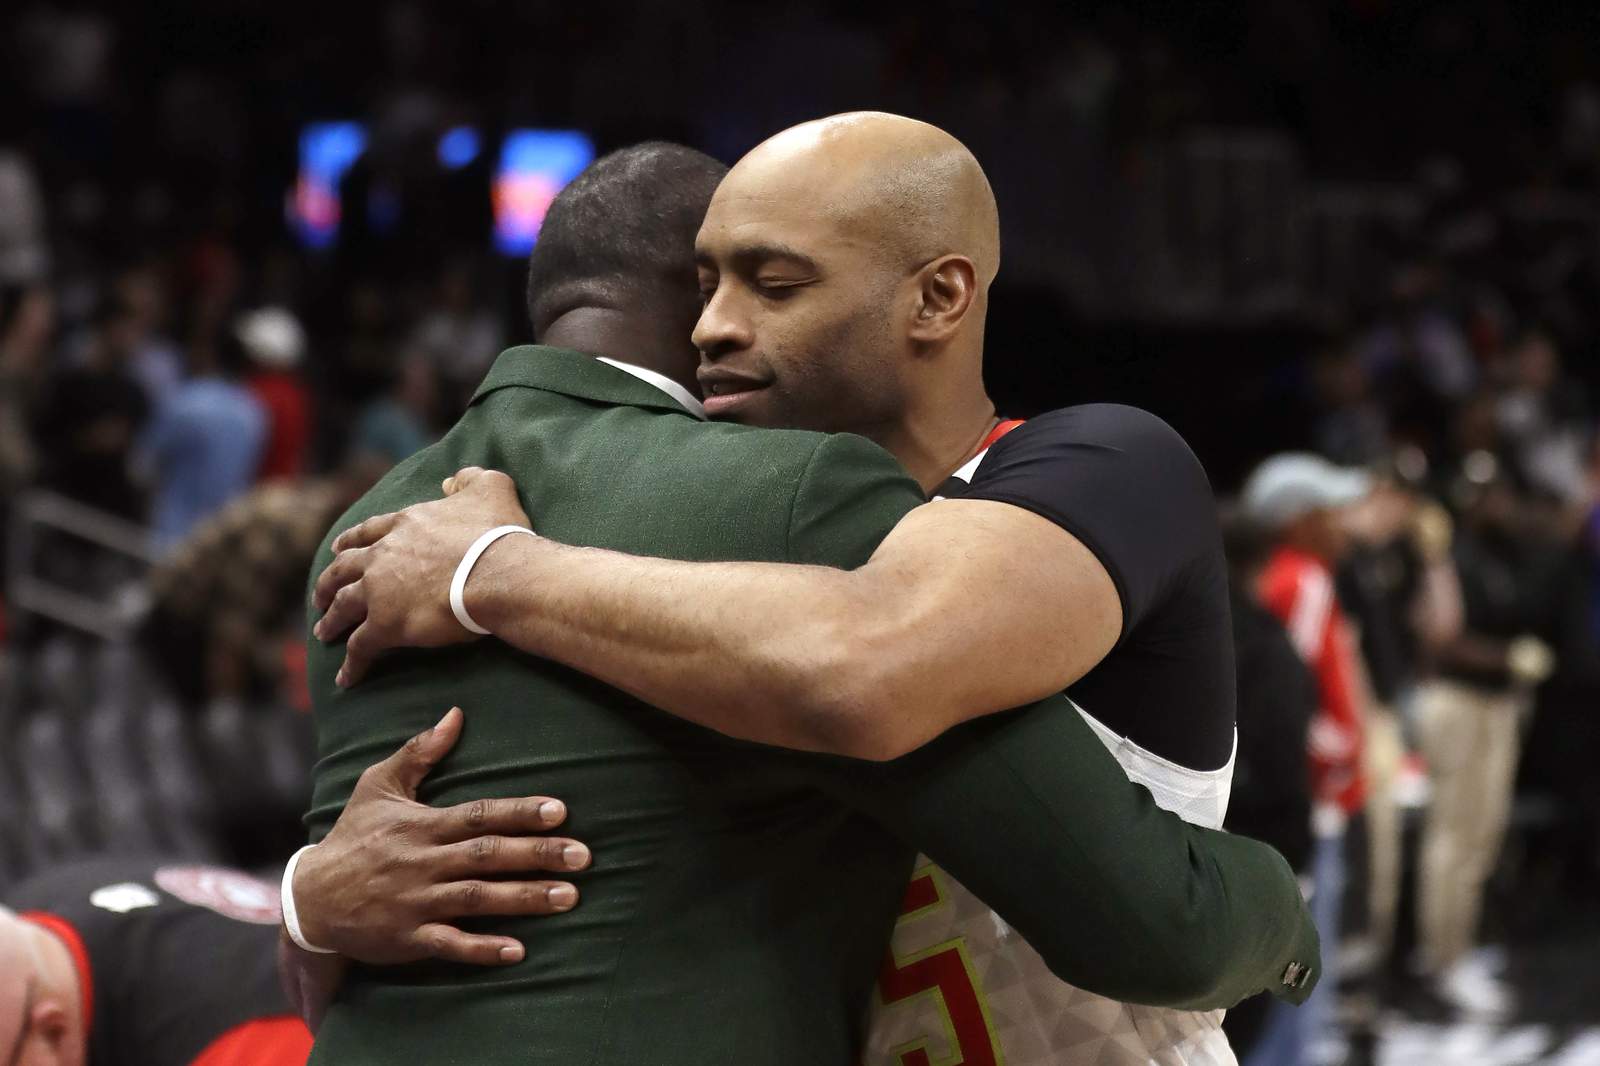 UNC Basketball in the NBA: Vince Carter officially retires